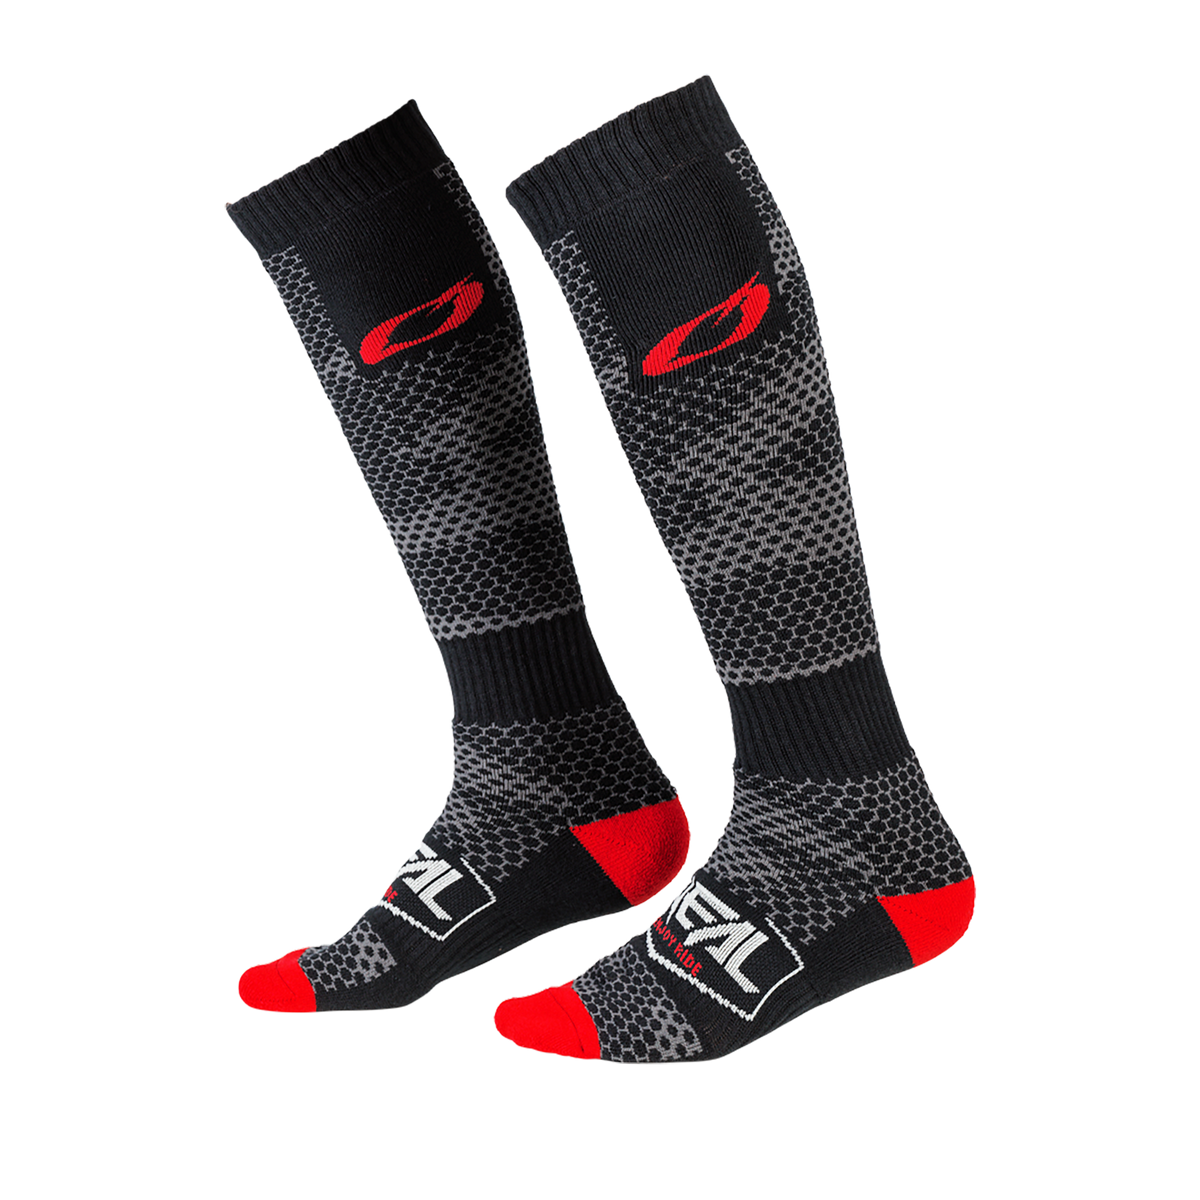 https://cdn.oneal.eu/assets/importedProductImages/ACCESSORIES/PRO%20MX%20SOCKS/COVERT/charcoal_gray/2021_ONeal_PRO%20MX%20Sock_COVERT_charcoal_gray.png